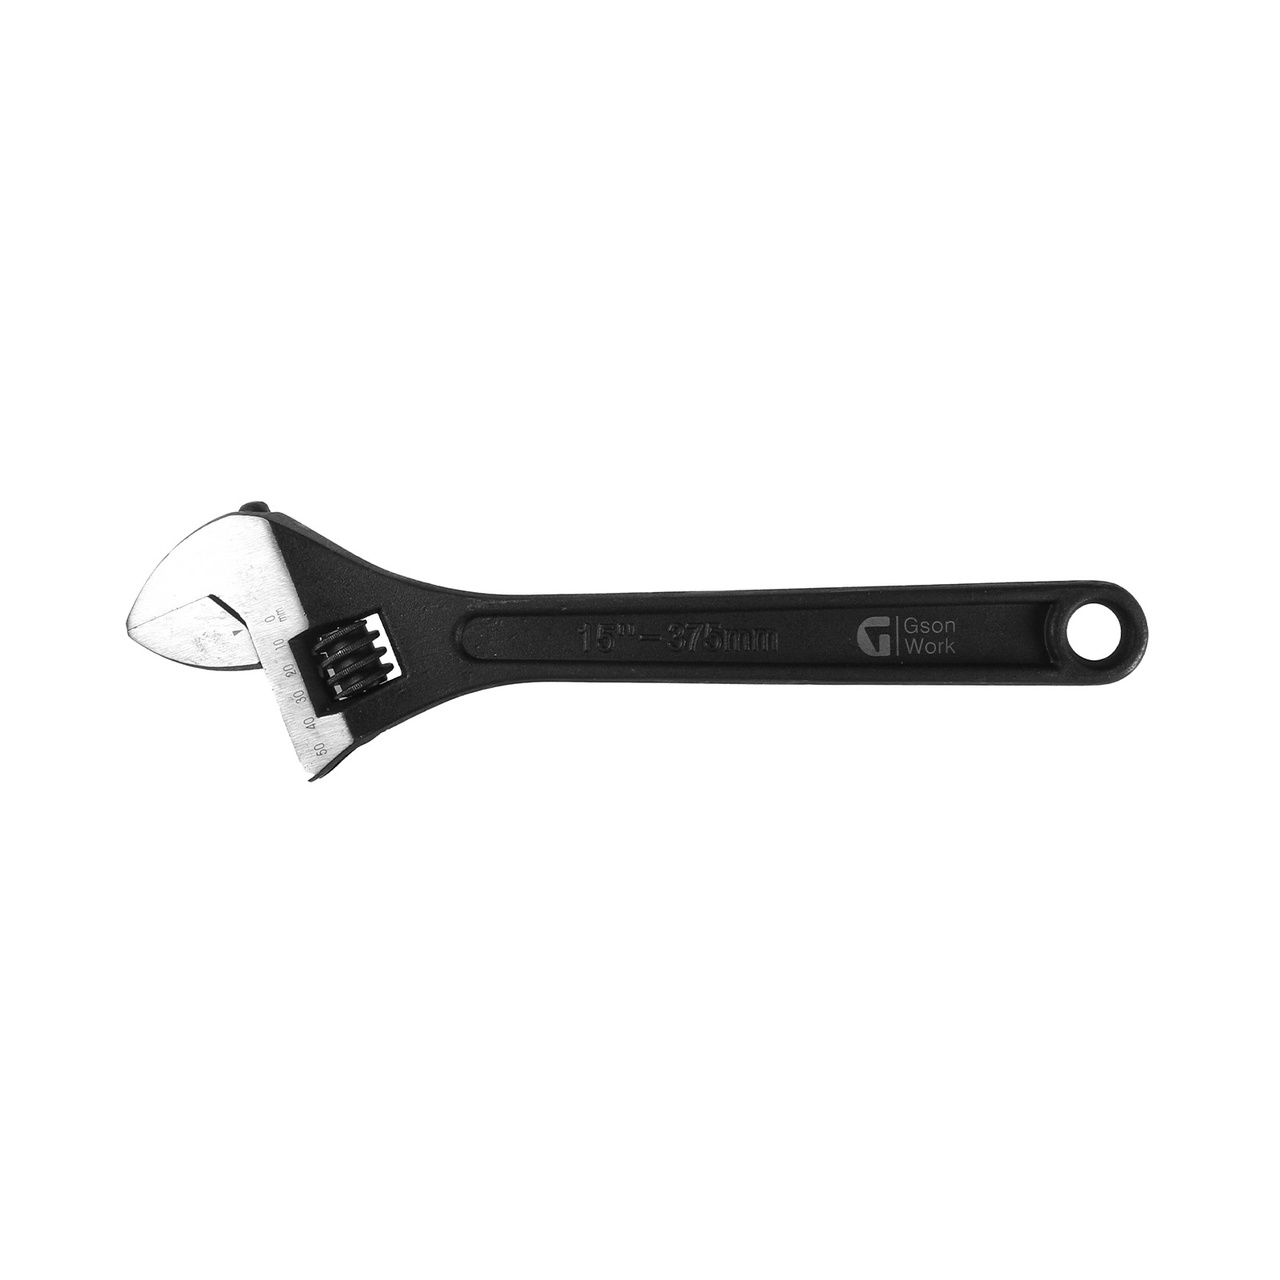 Adjustable Wrench 12" / 300 mm